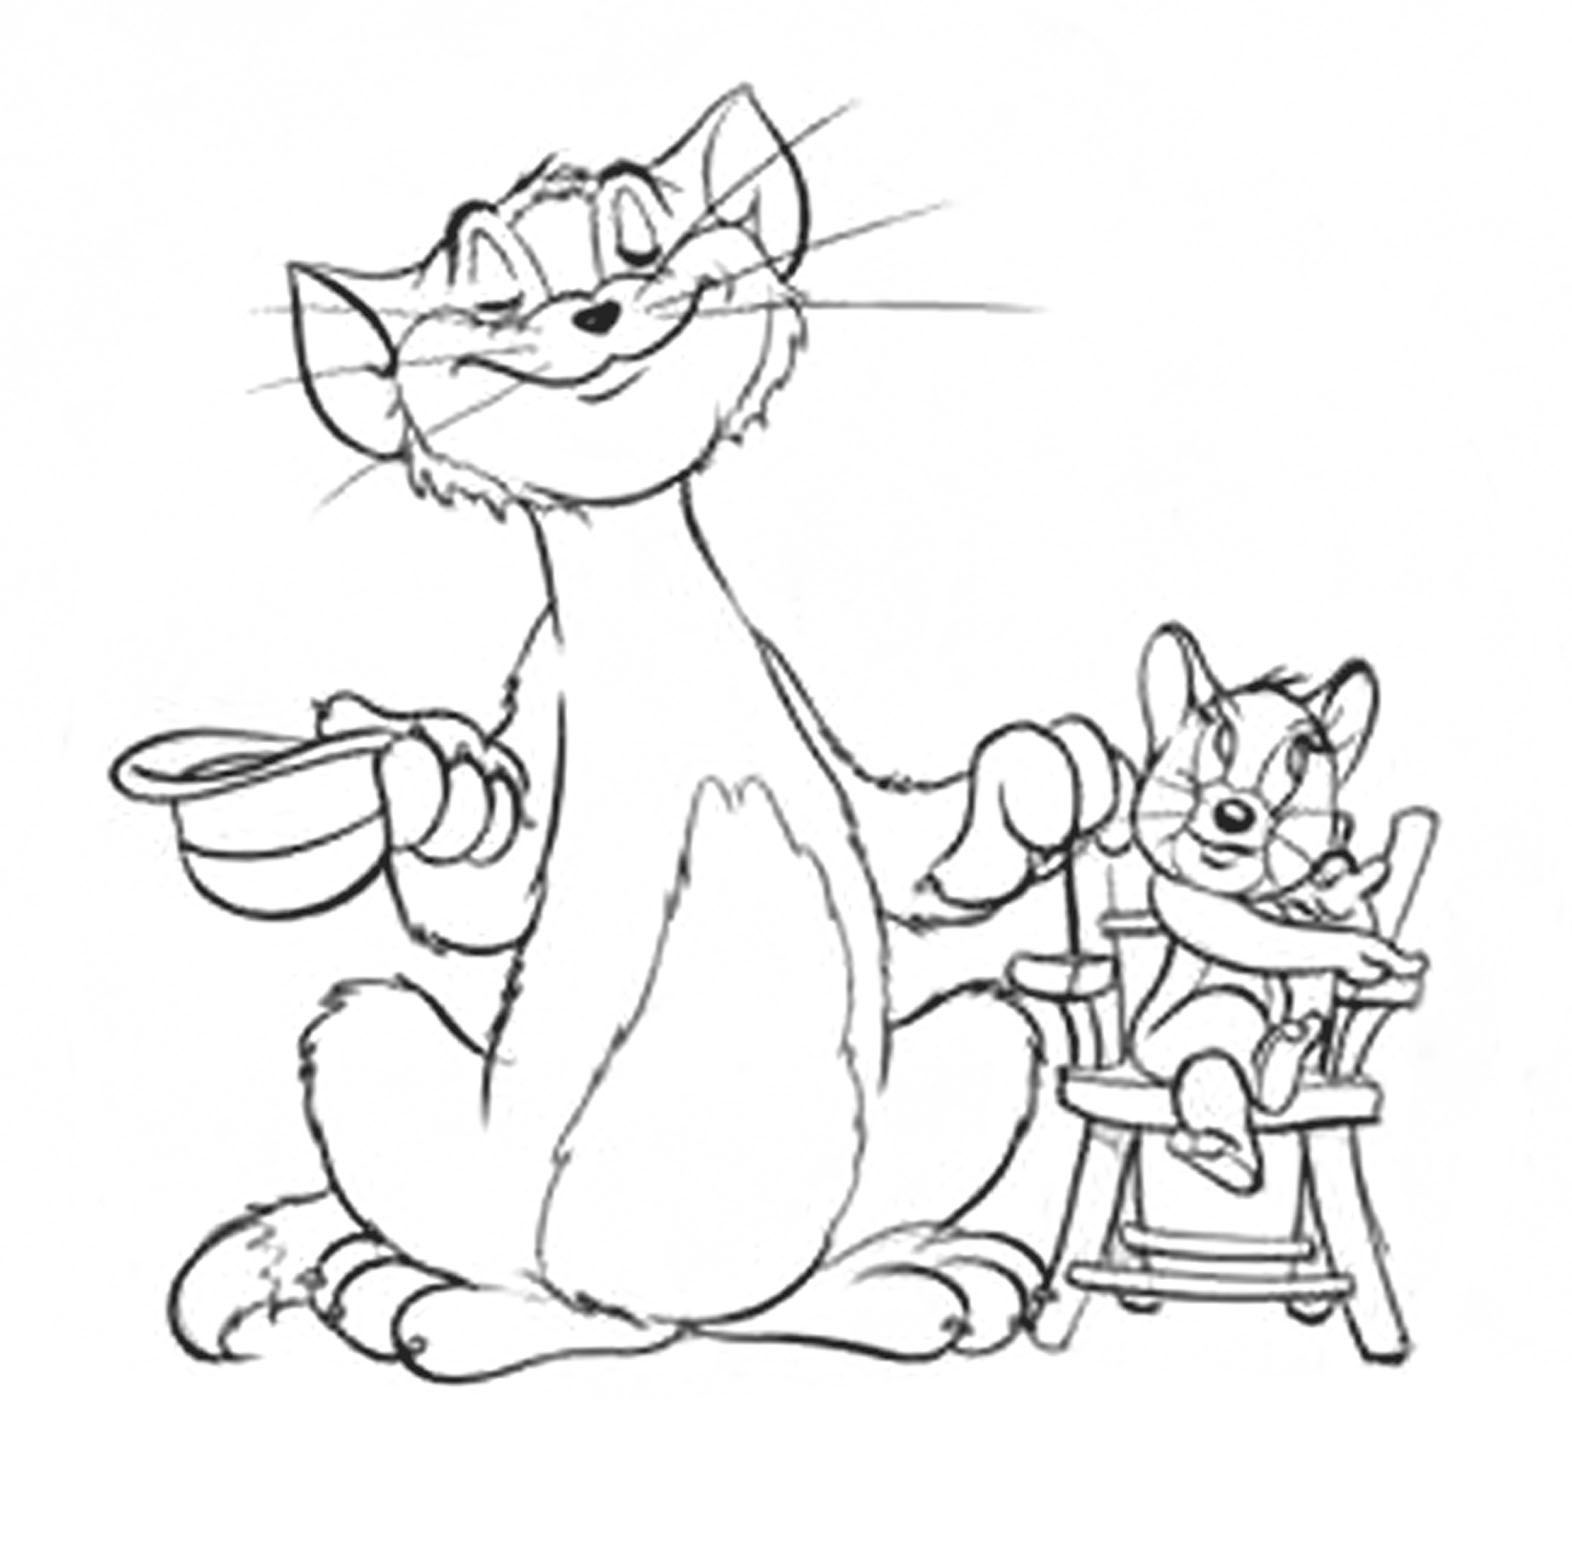 Drawing Tom and Jerry #24371 (Cartoons) – Printable coloring pages